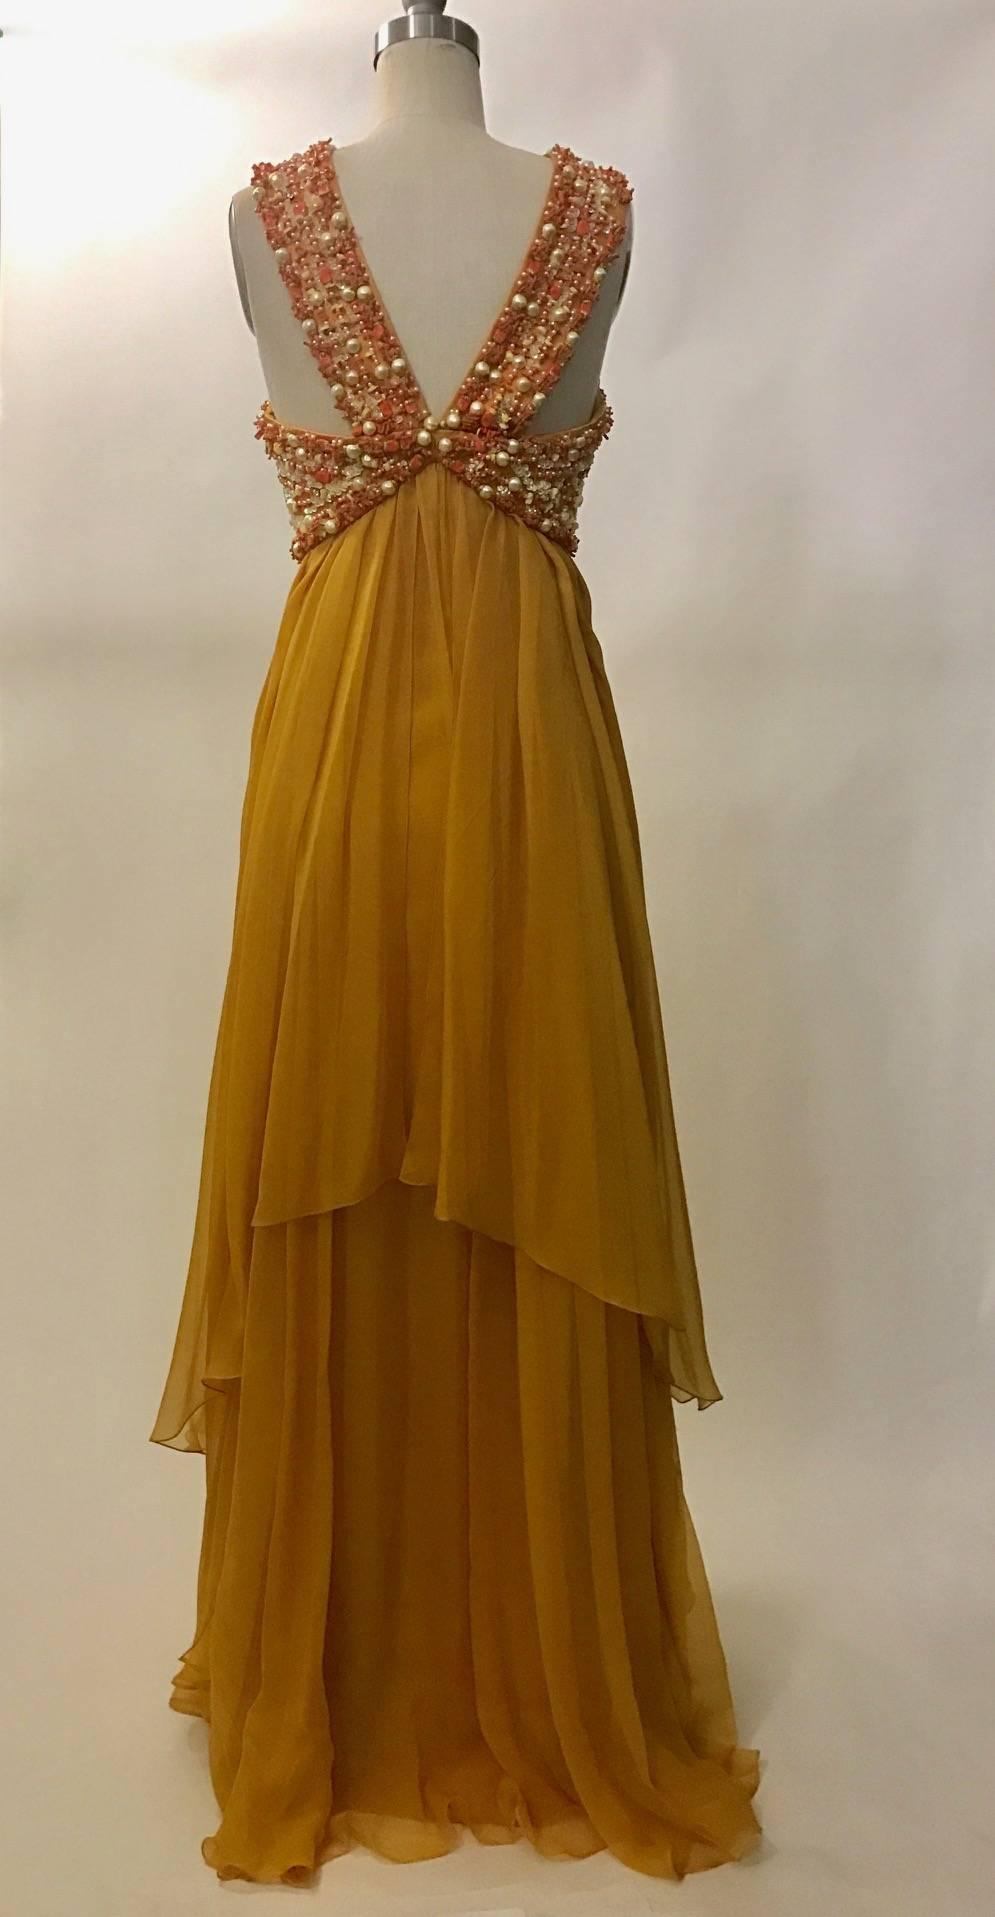 Christian Dior by John Galliano halterneck marigold yellow flowing layered chiffon gown with beaded embroidery featuring sequins interspersed with imitation pearls and coral. Empire waist. Side zip with snaps fastening top layer of chiffon.

Resort